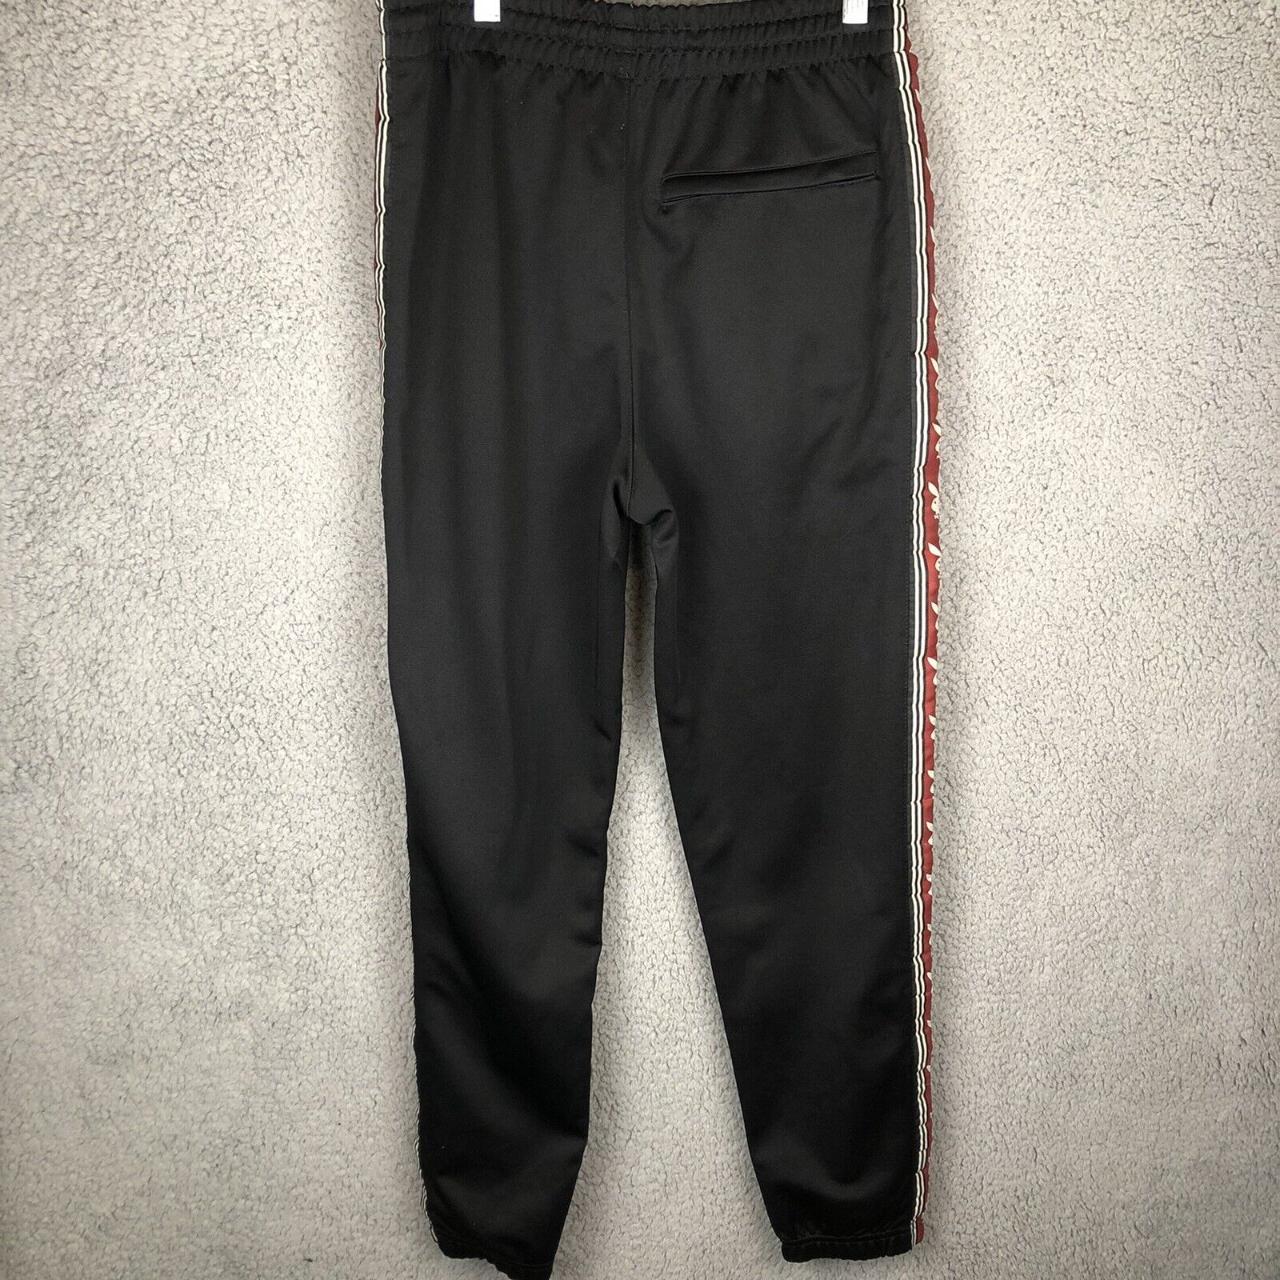 Playboy By PacSun Pants Size Small Mens Jogger Track... - Depop